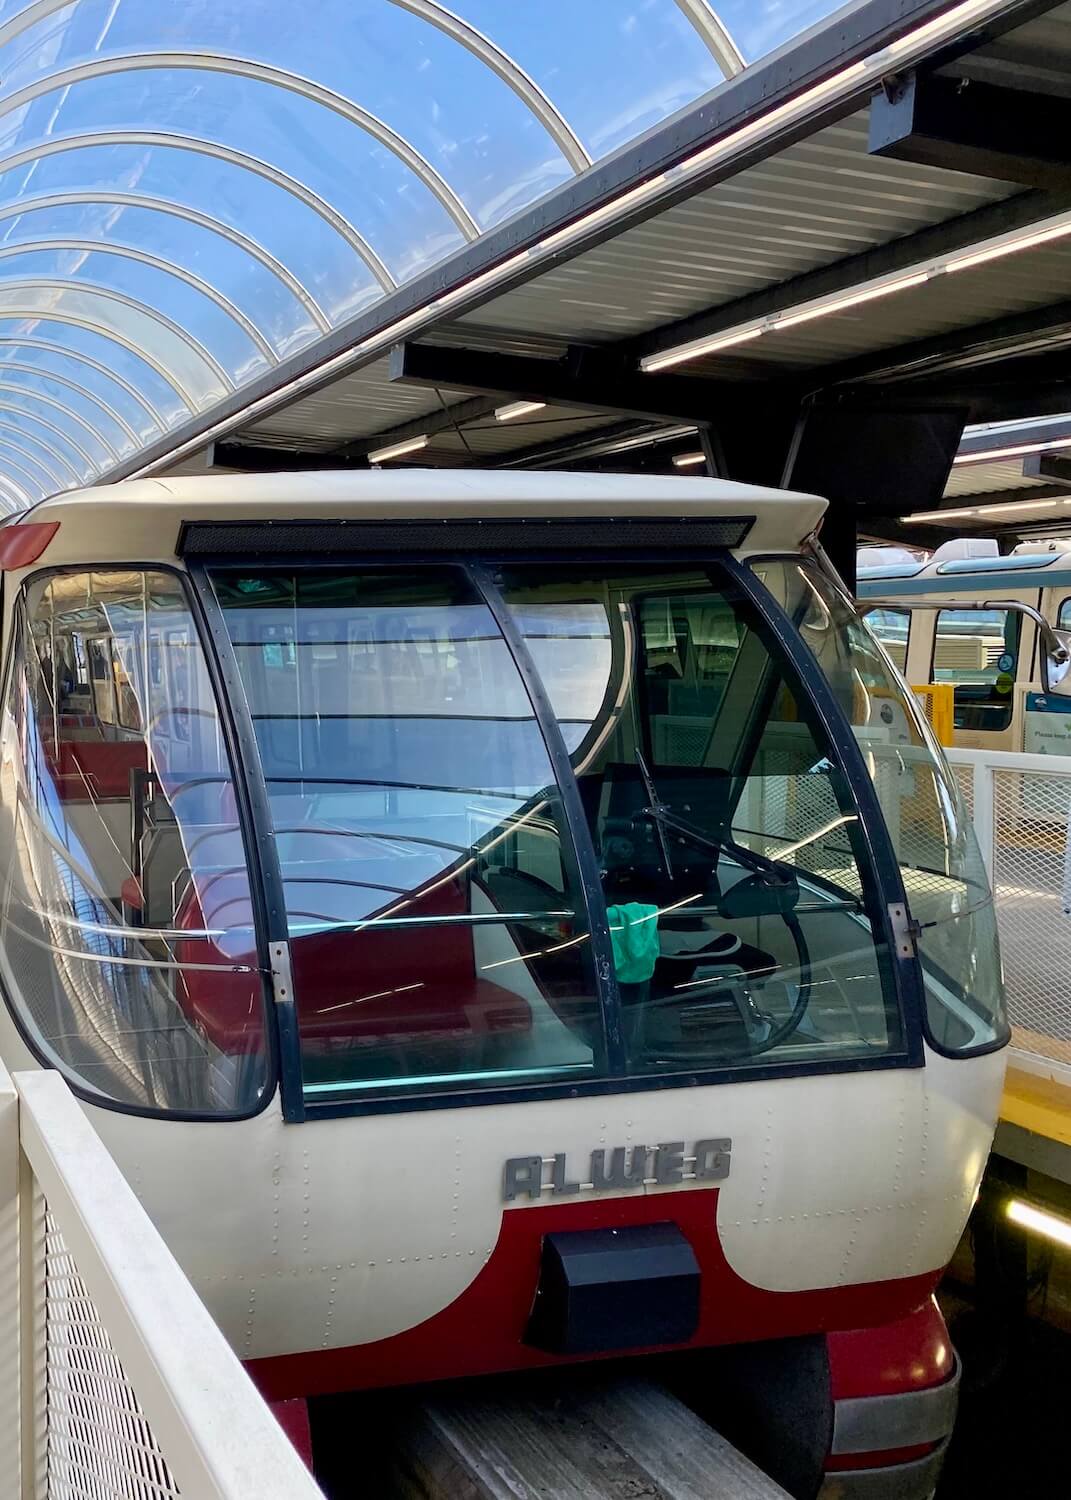 The Seattle Monorail travels between Downtown Seattle and Seattle Center.